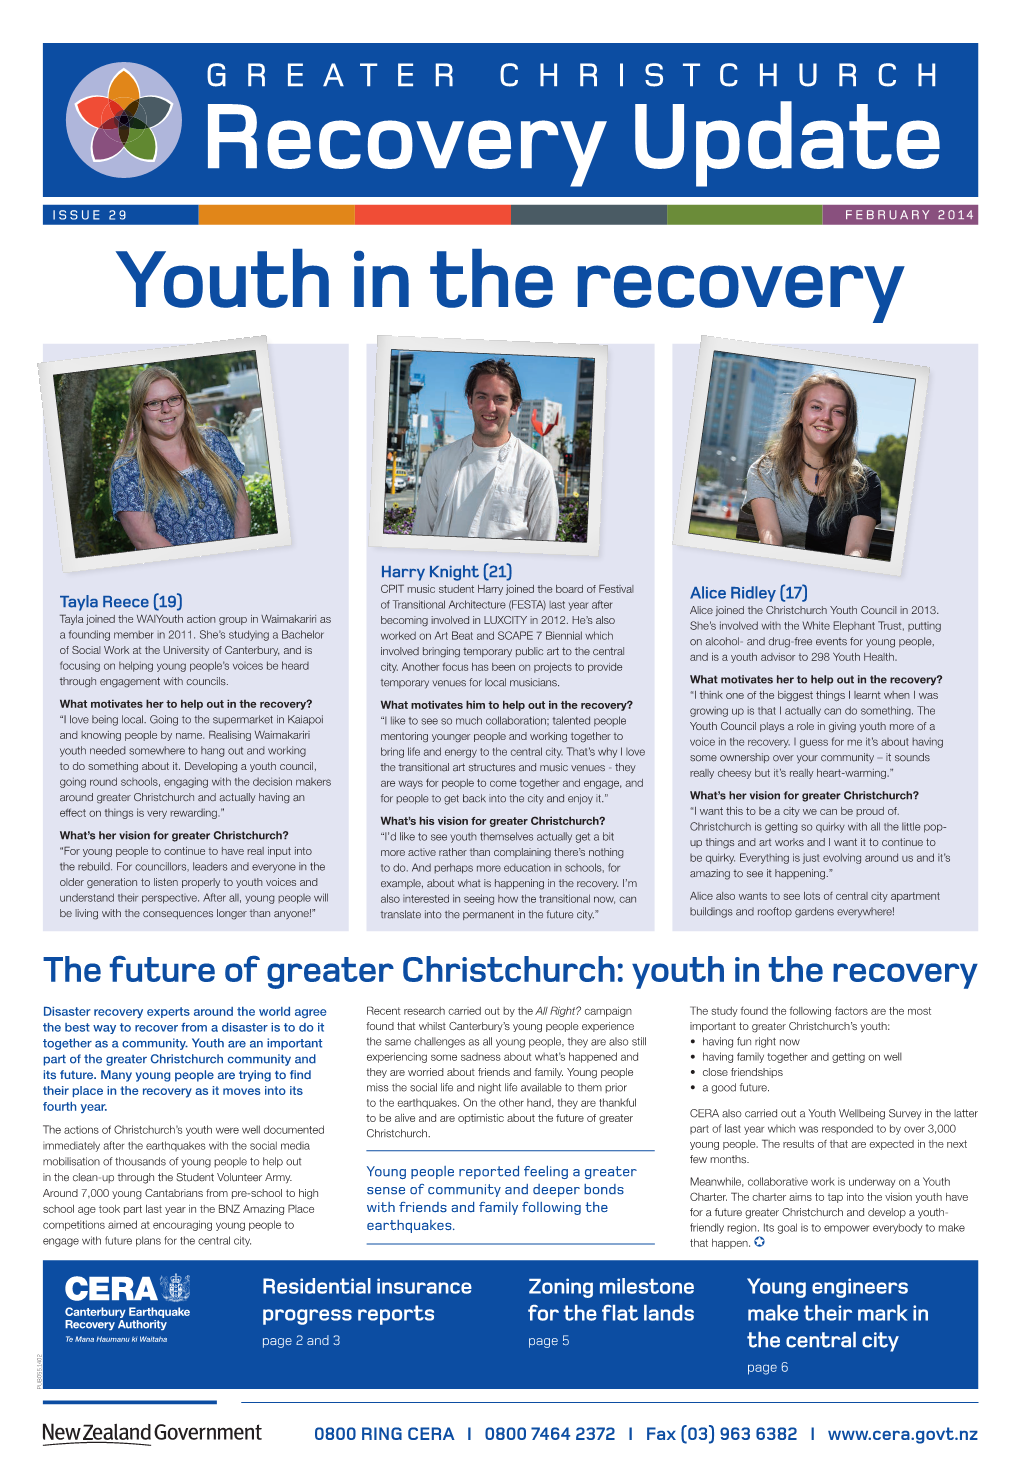 Greater Christchurch Recovery Update 29